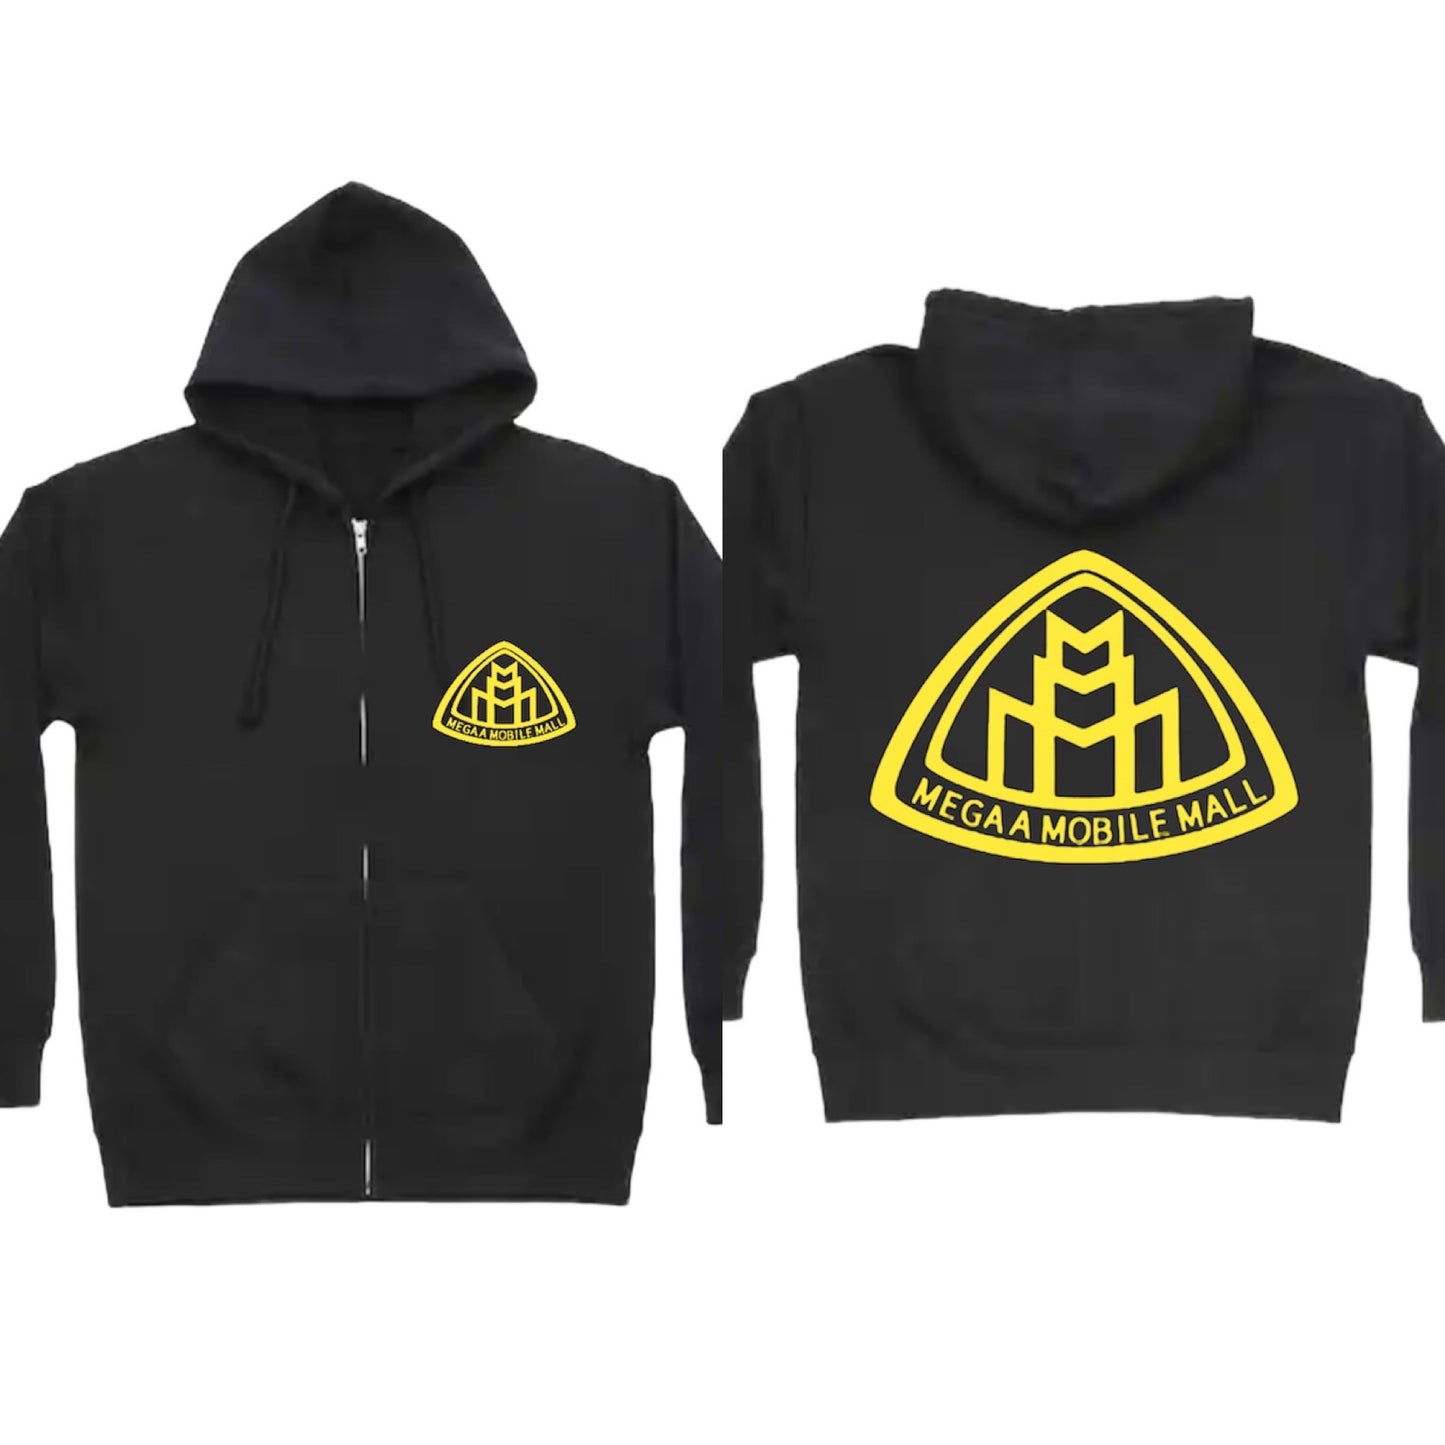 megaamobilemall black zip up hoodie with yellow logo color